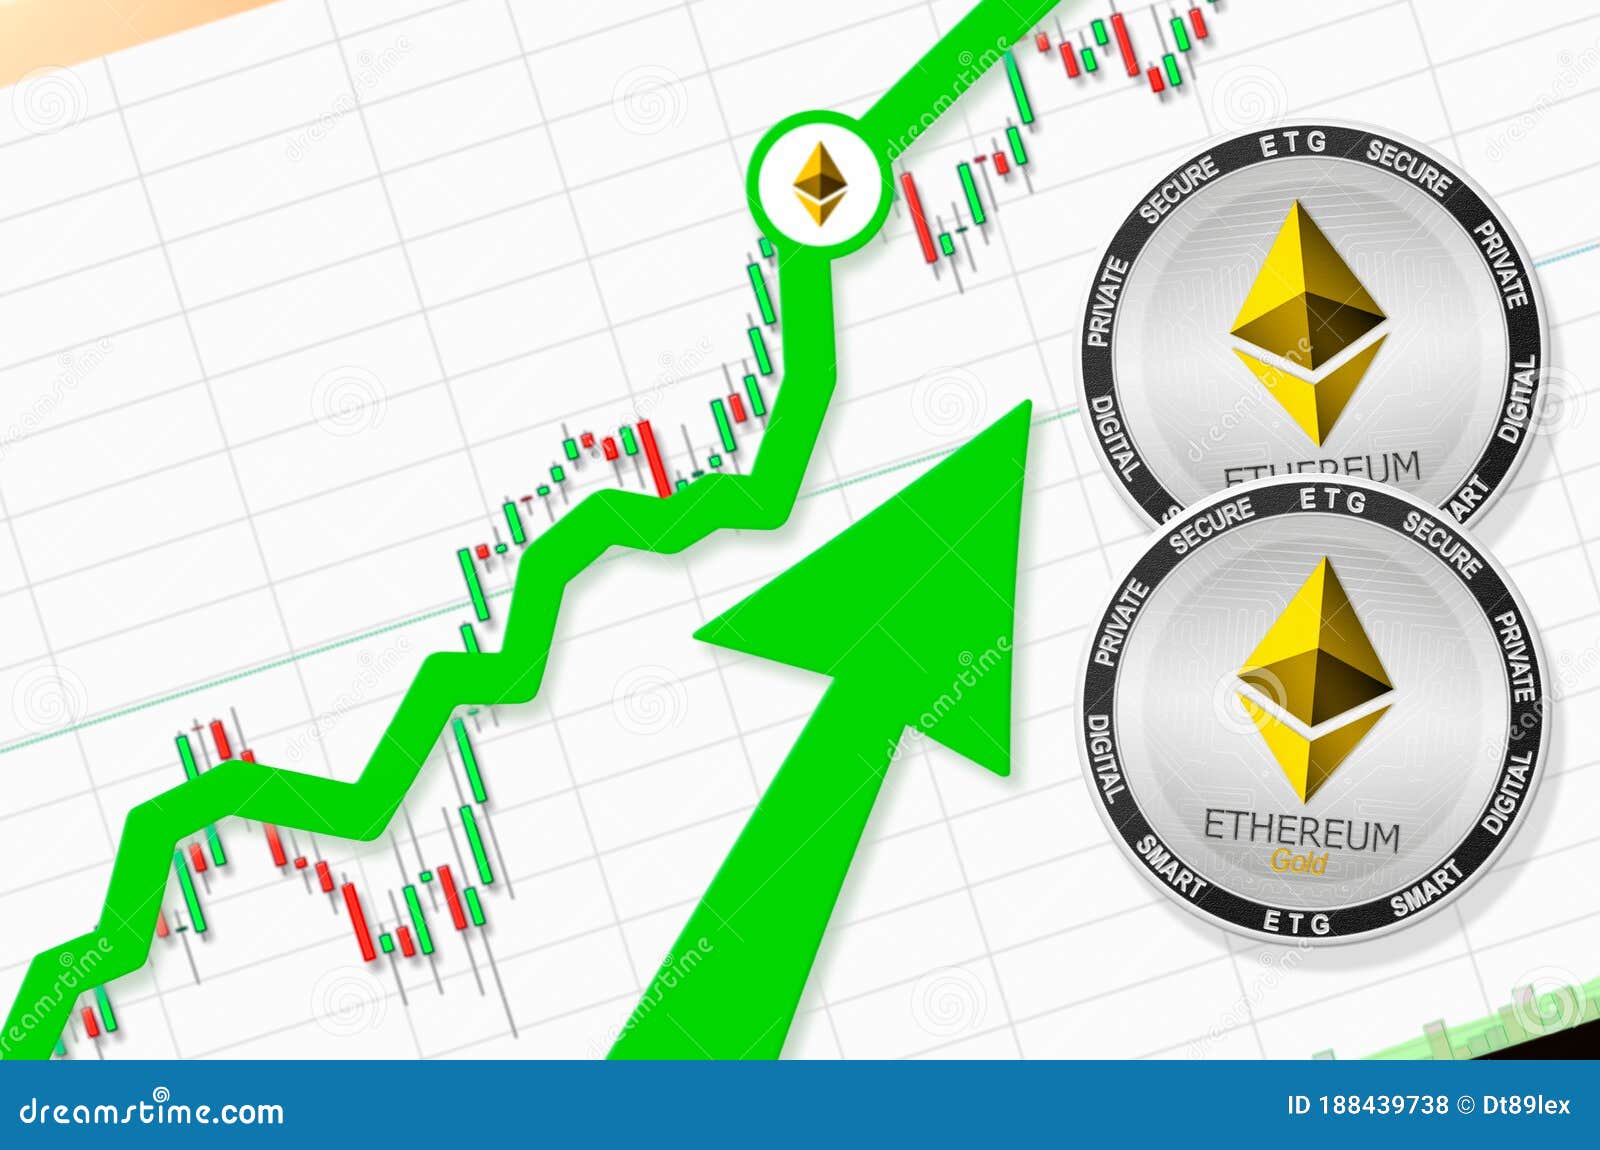 Ethereum Price Prediction A Good Investment?